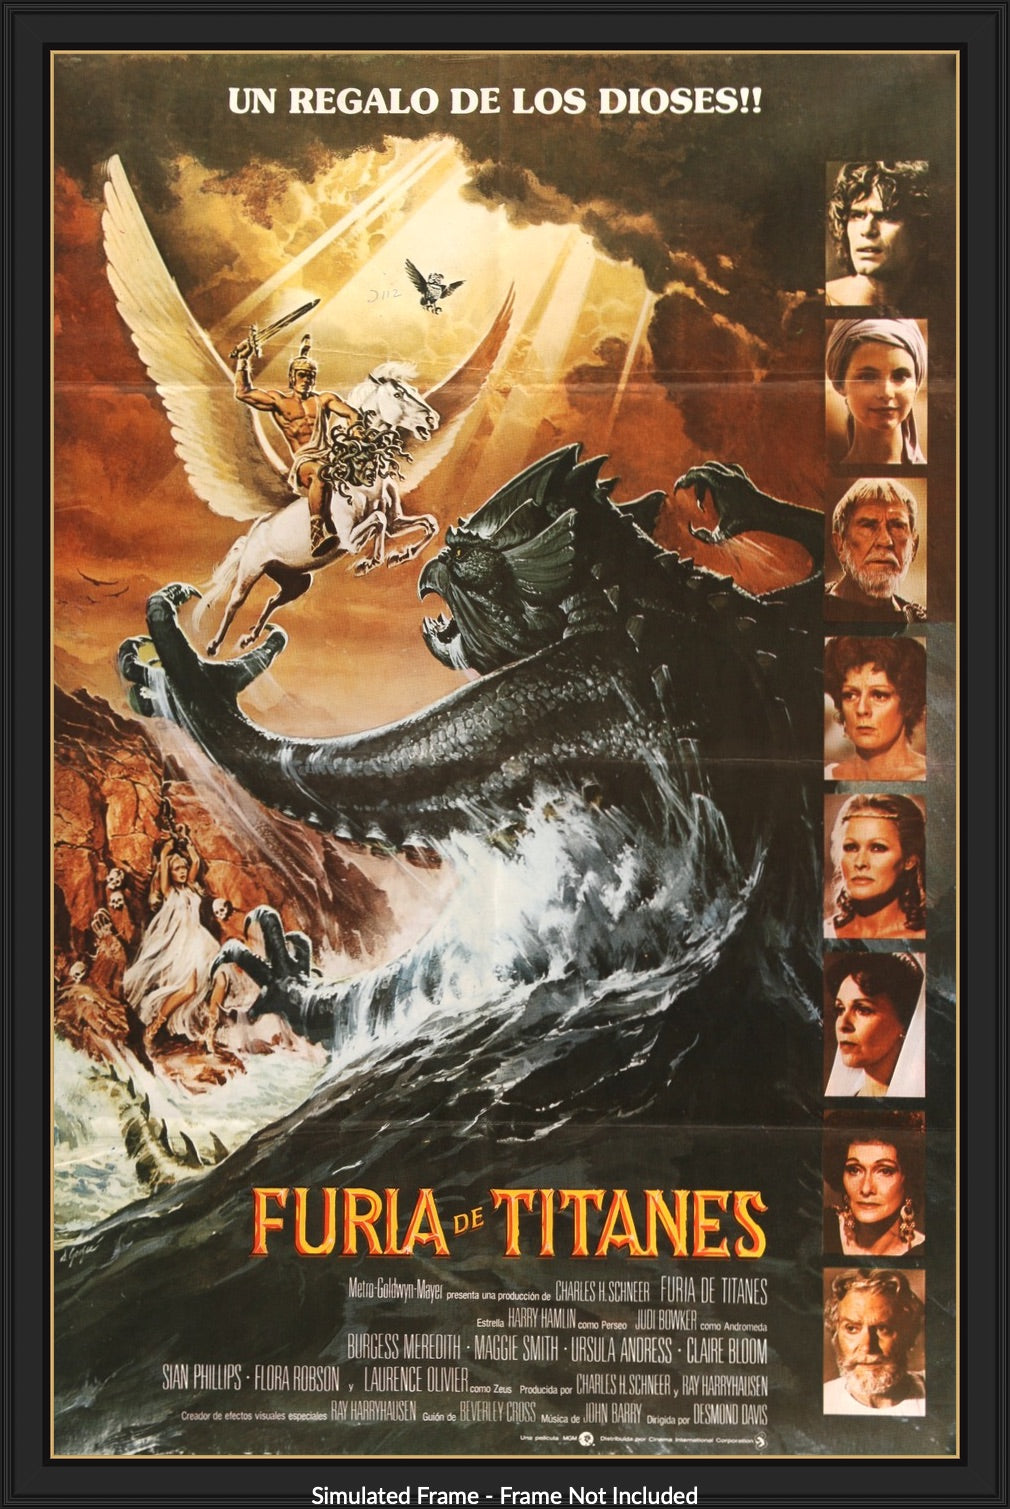 CLASH OF THE TITANS (1981) - Used DVD